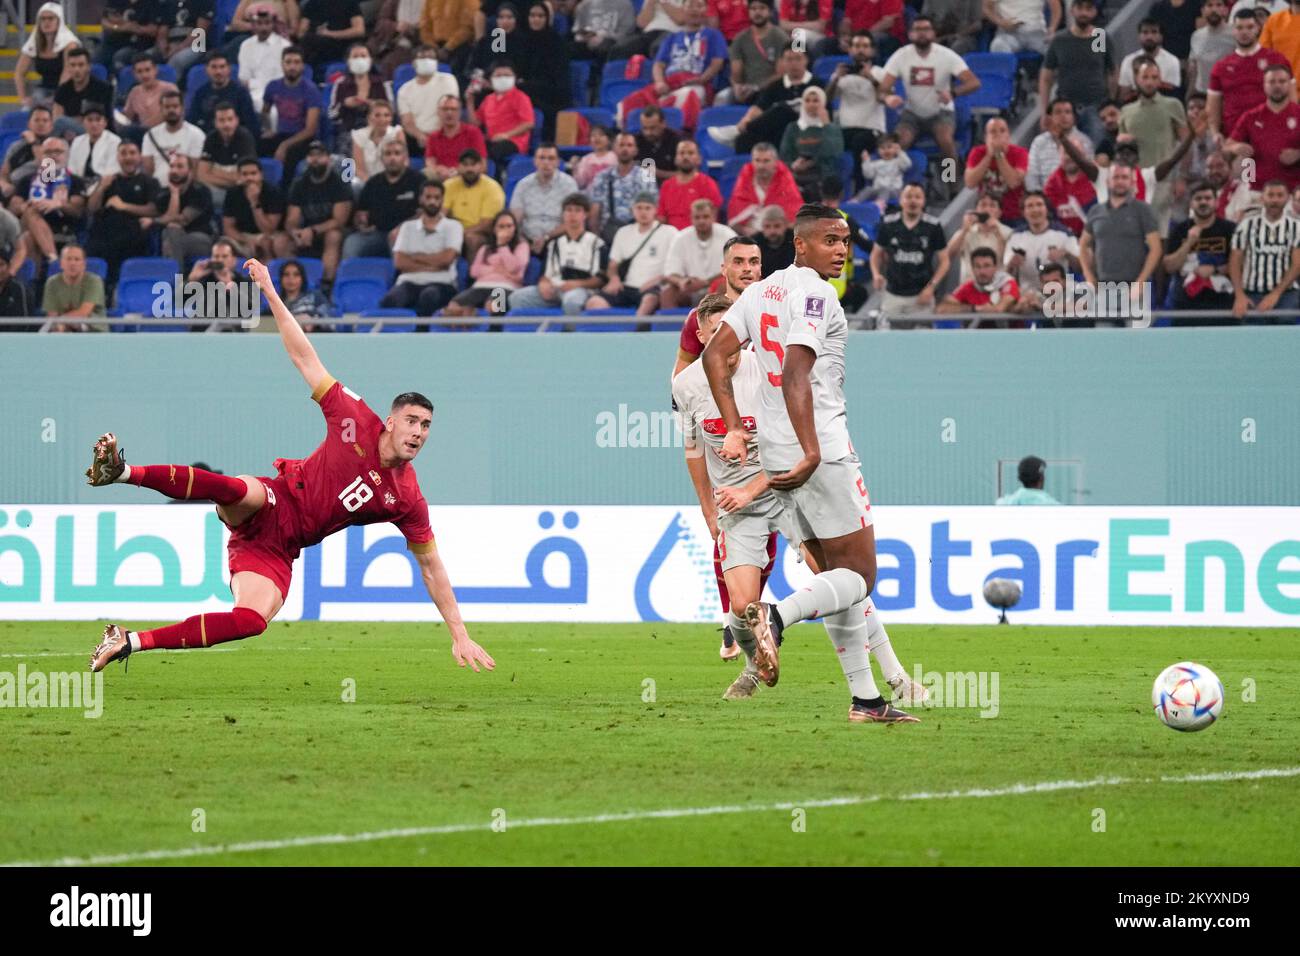 Doha, Qatar. 2nd Dec, 2022. Dusan Vlahovic (L) of Serbia scores during the Group G match between Serbia and Switzerland at the 2022 FIFA World Cup at Stadium 974 in Doha, Qatar, Dec. 2, 2022. Credit: Li Gang/Xinhua/Alamy Live News Stock Photo